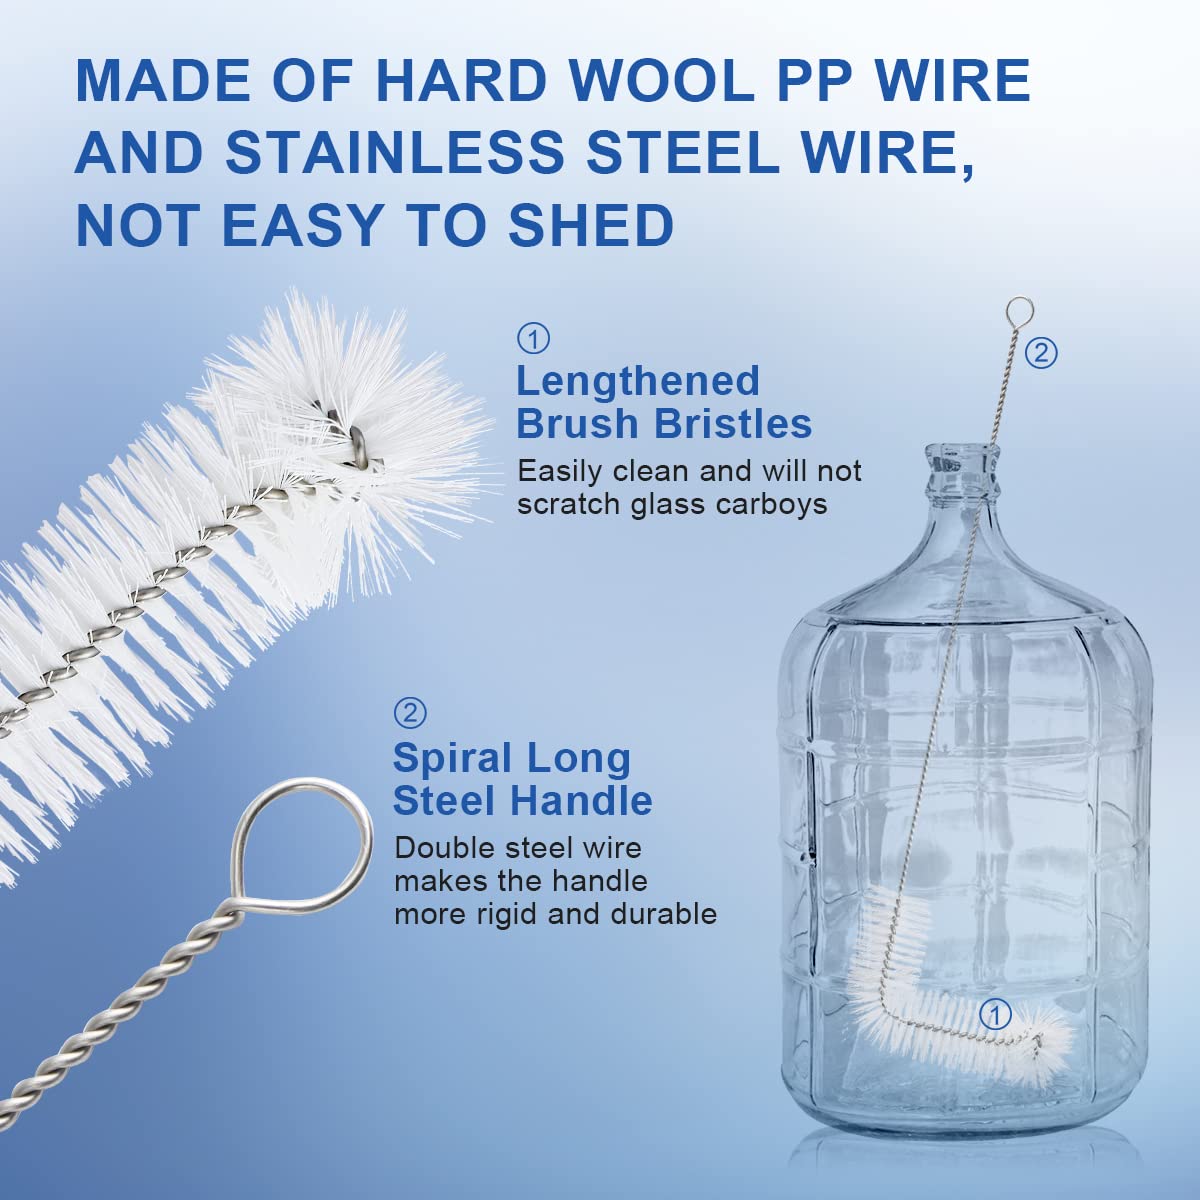 made of hard wool pp wire and stainless steel wire, not easy to shed